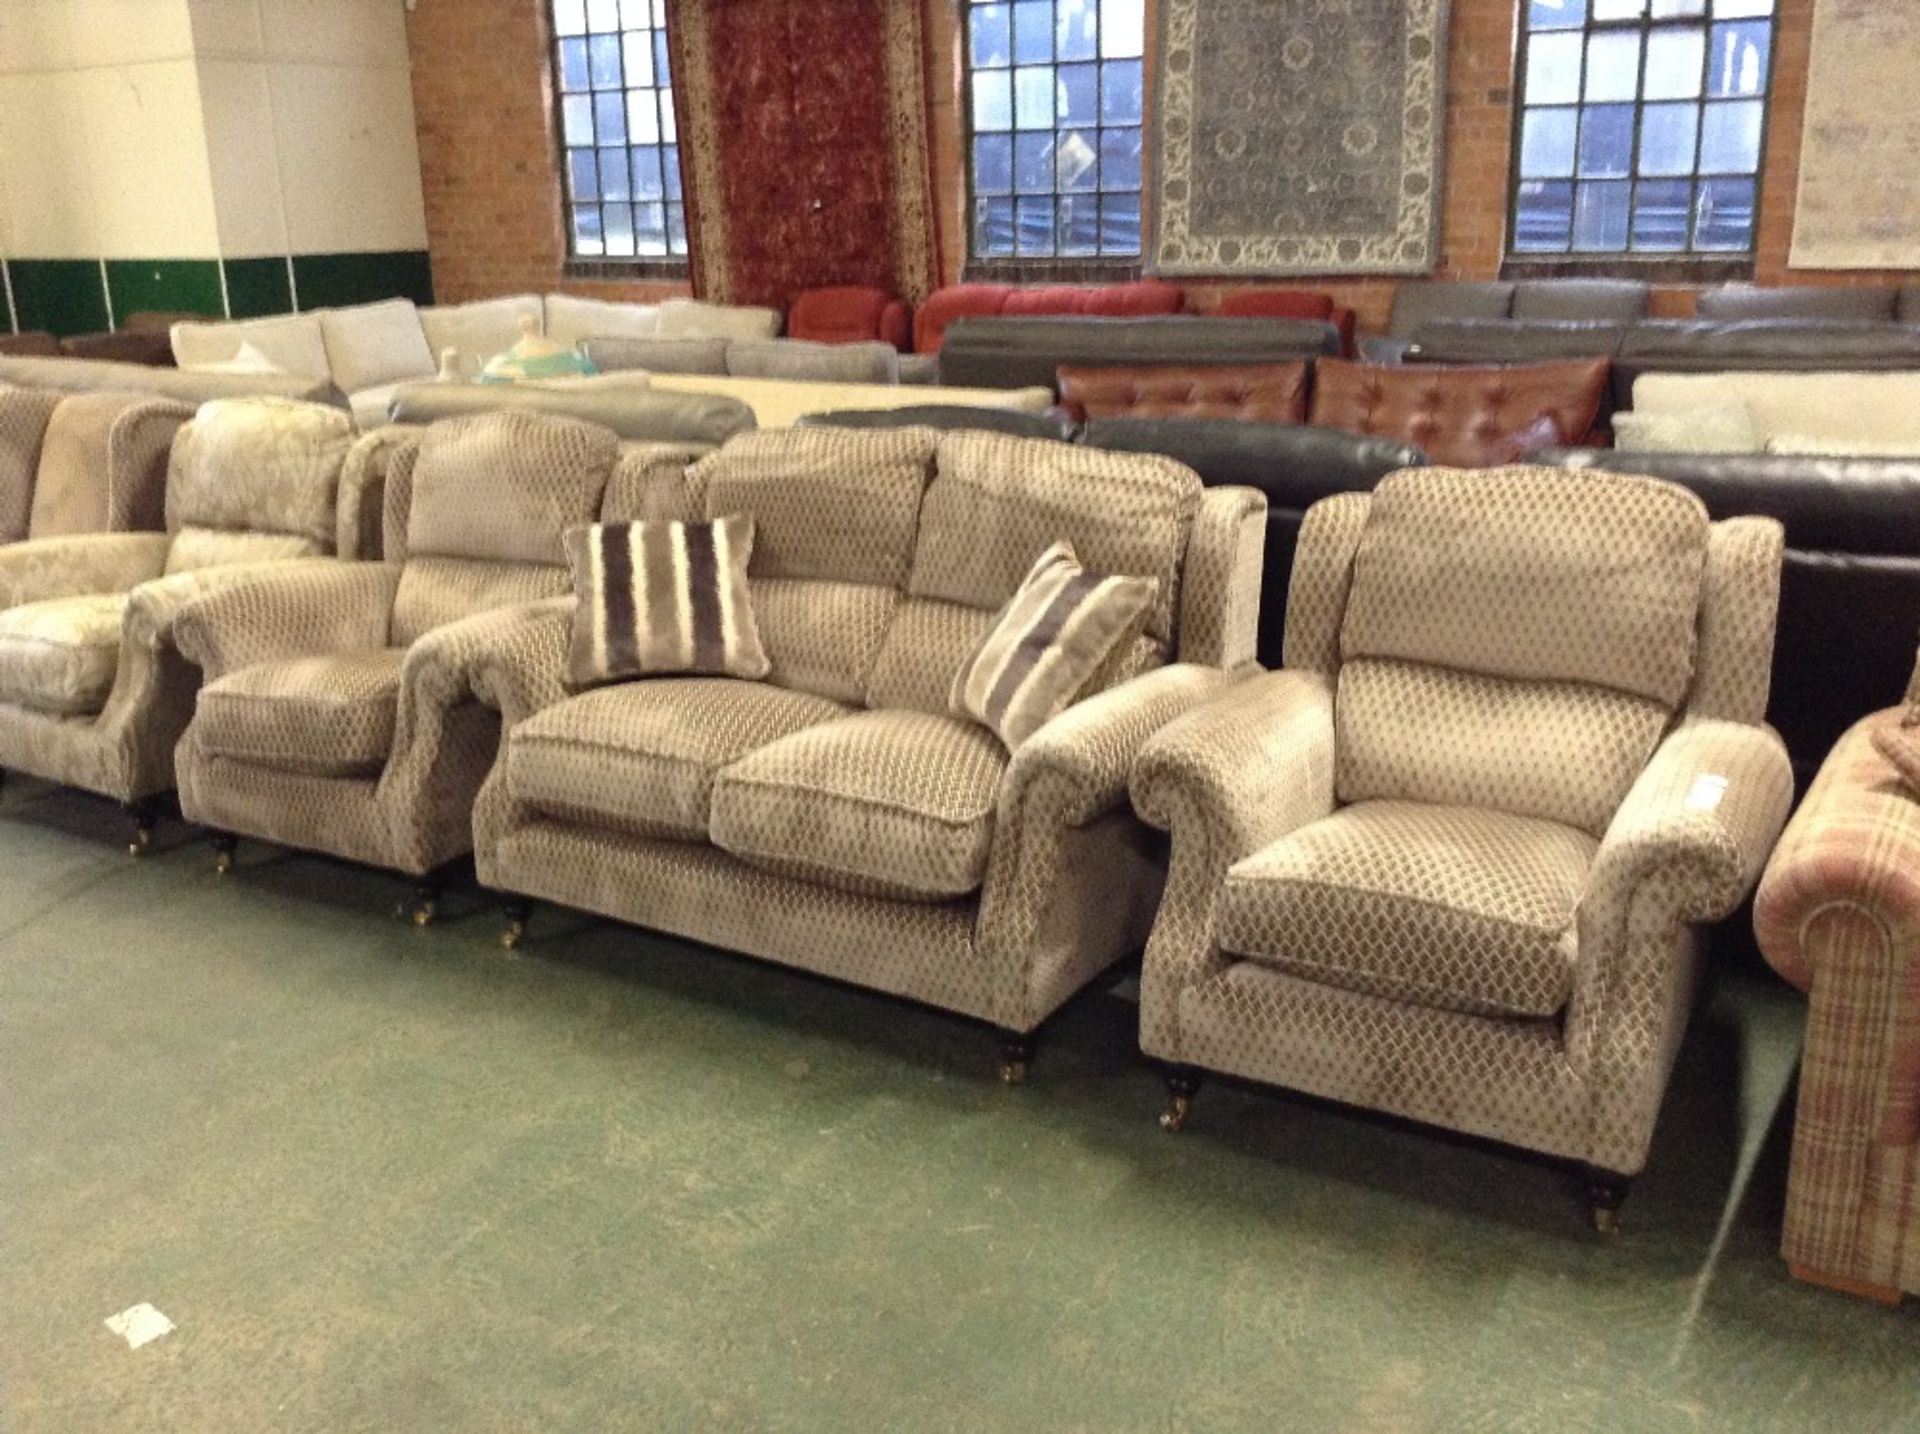 BROWN PATTERNED 2 SEATER SOFA AND 2 CHAIRS (TR0009